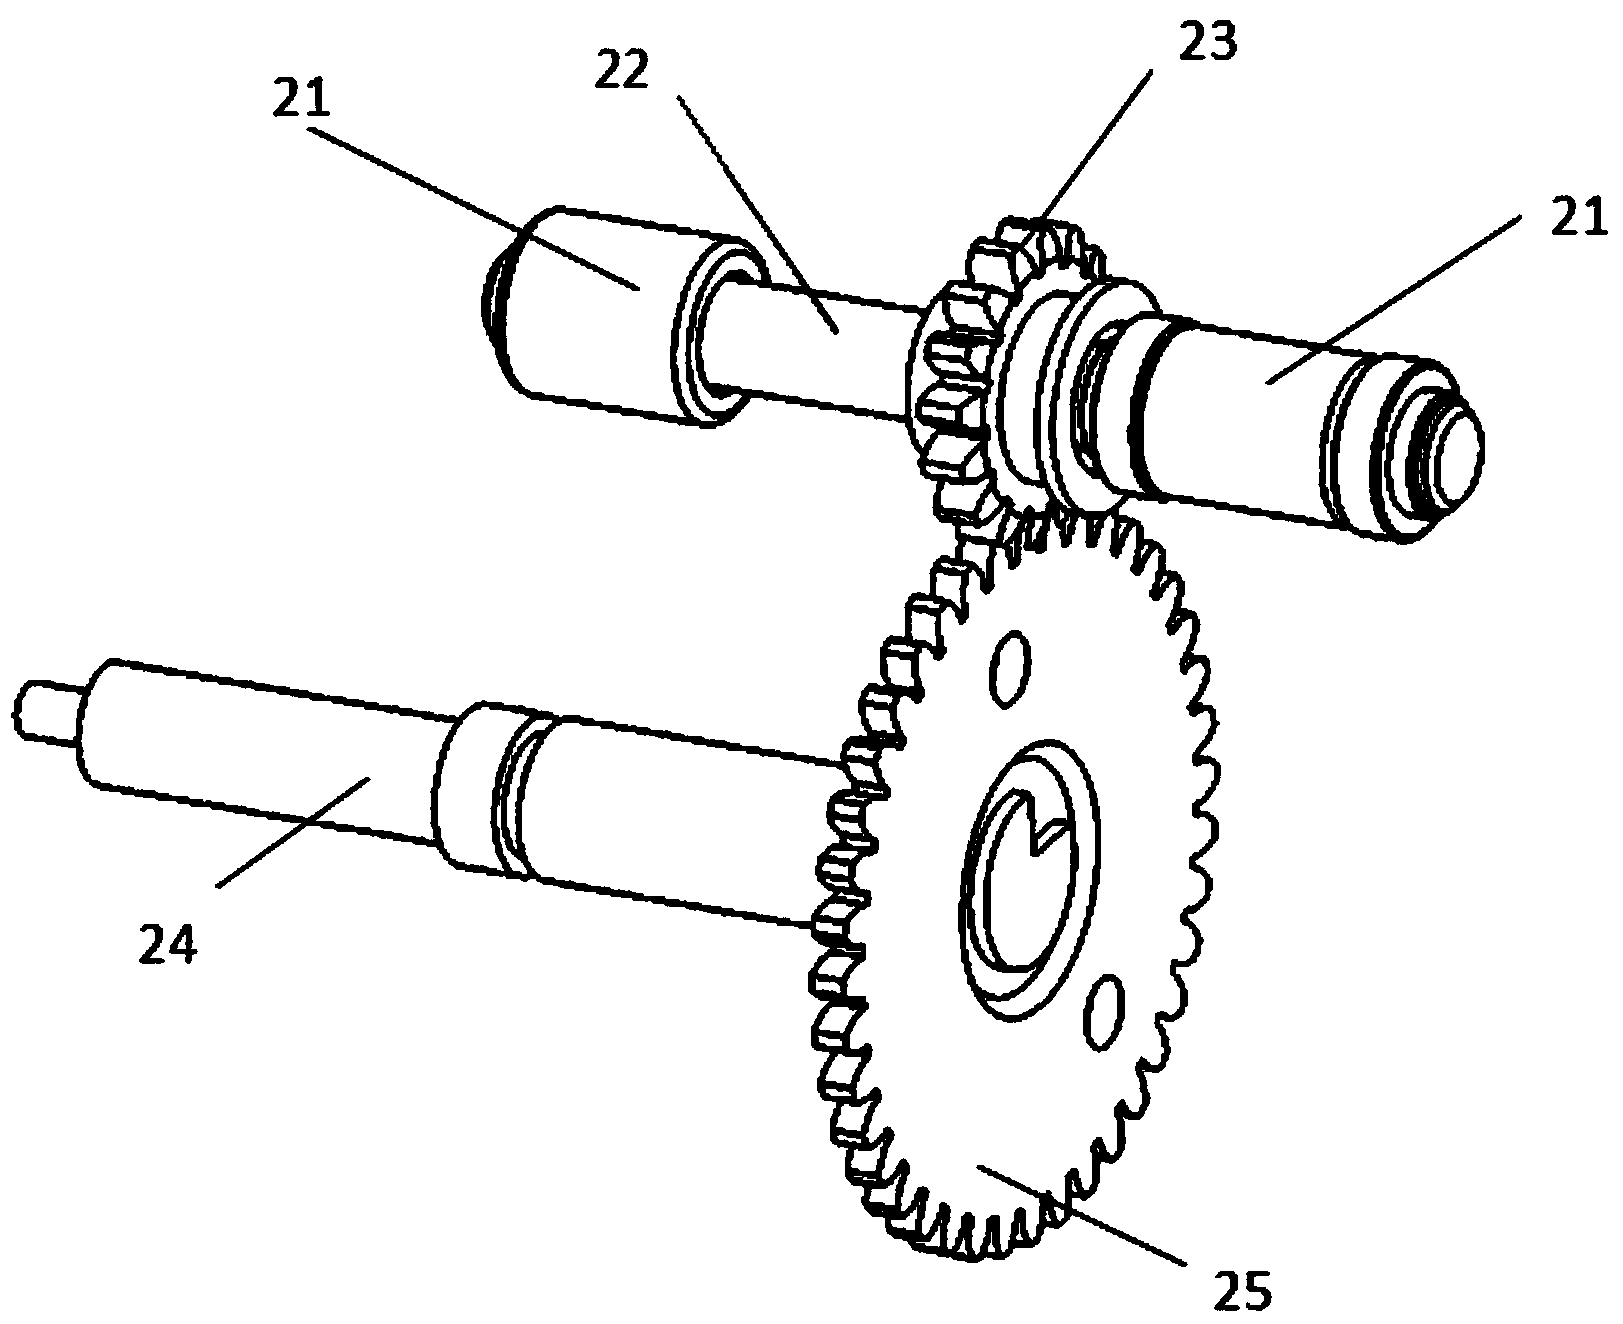 Robot rotational joint driving device and method